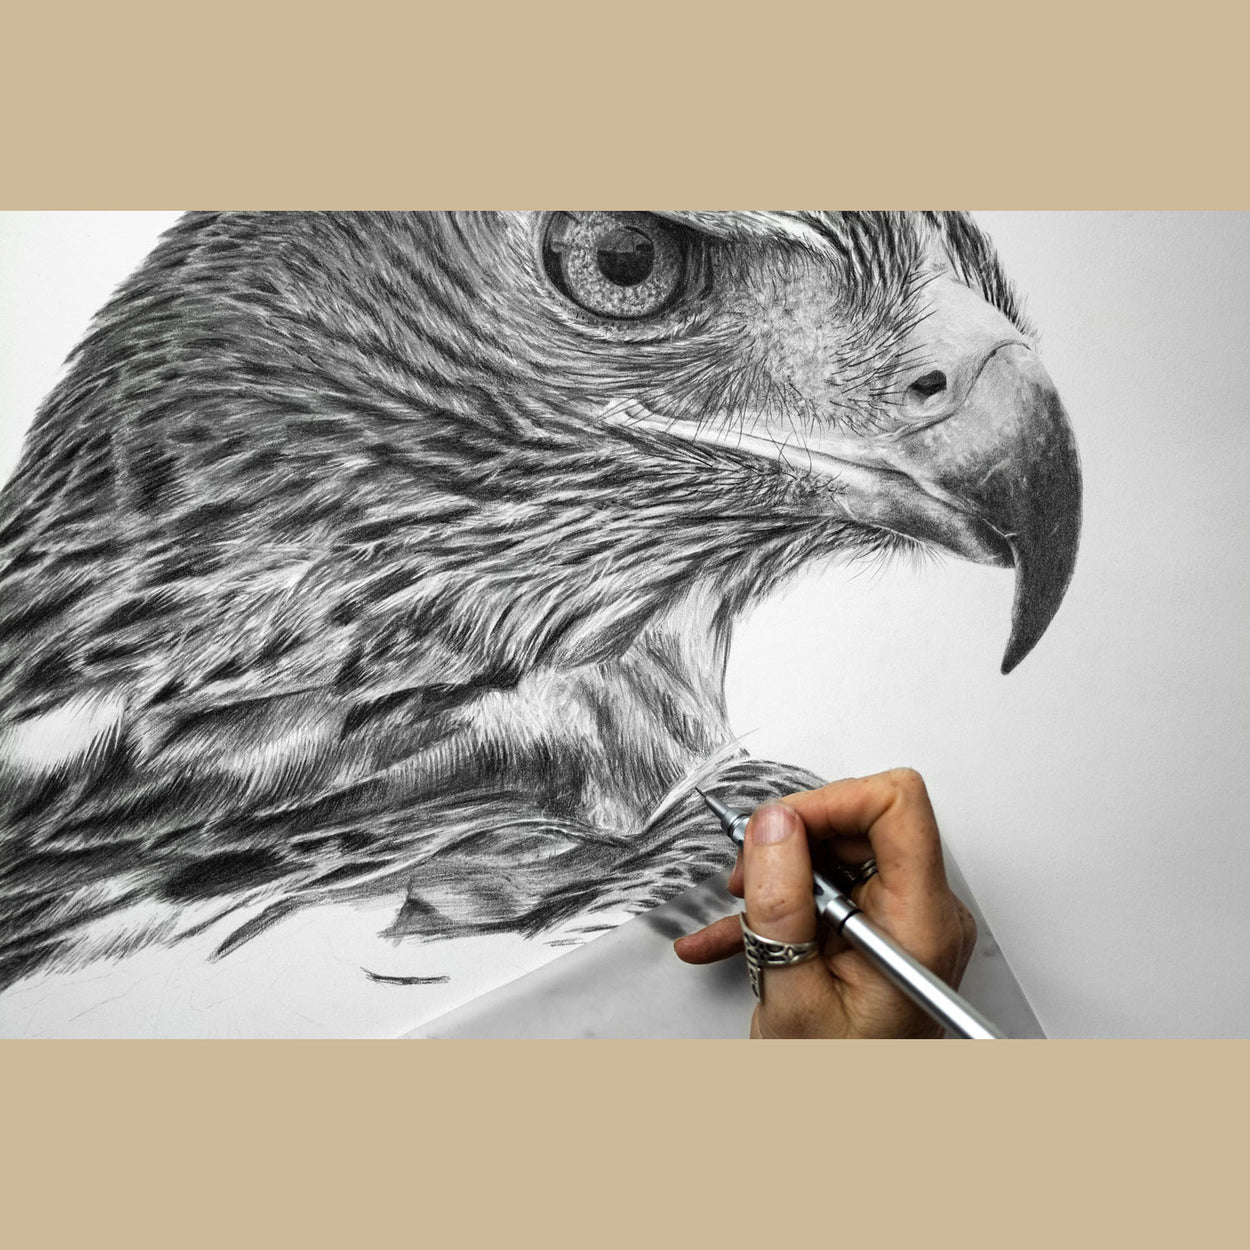 Hand holding pencil over an incomplete drawing of a golden eagle